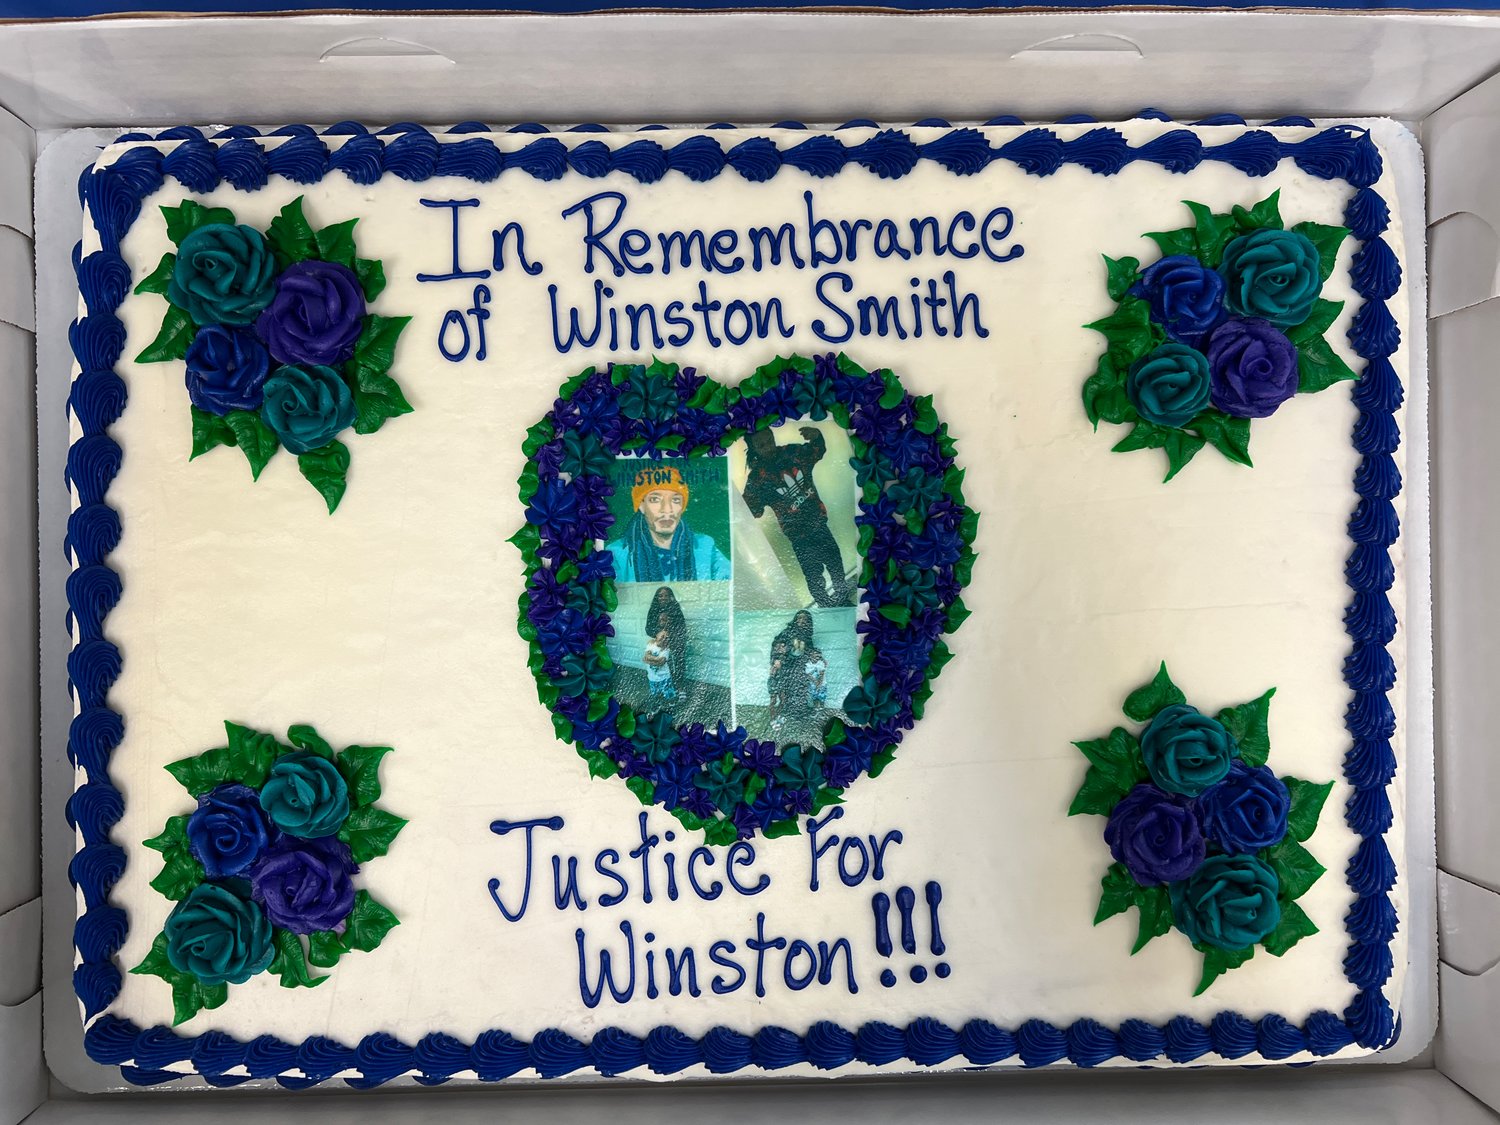 A cake made in remembrance of Winston Smith.